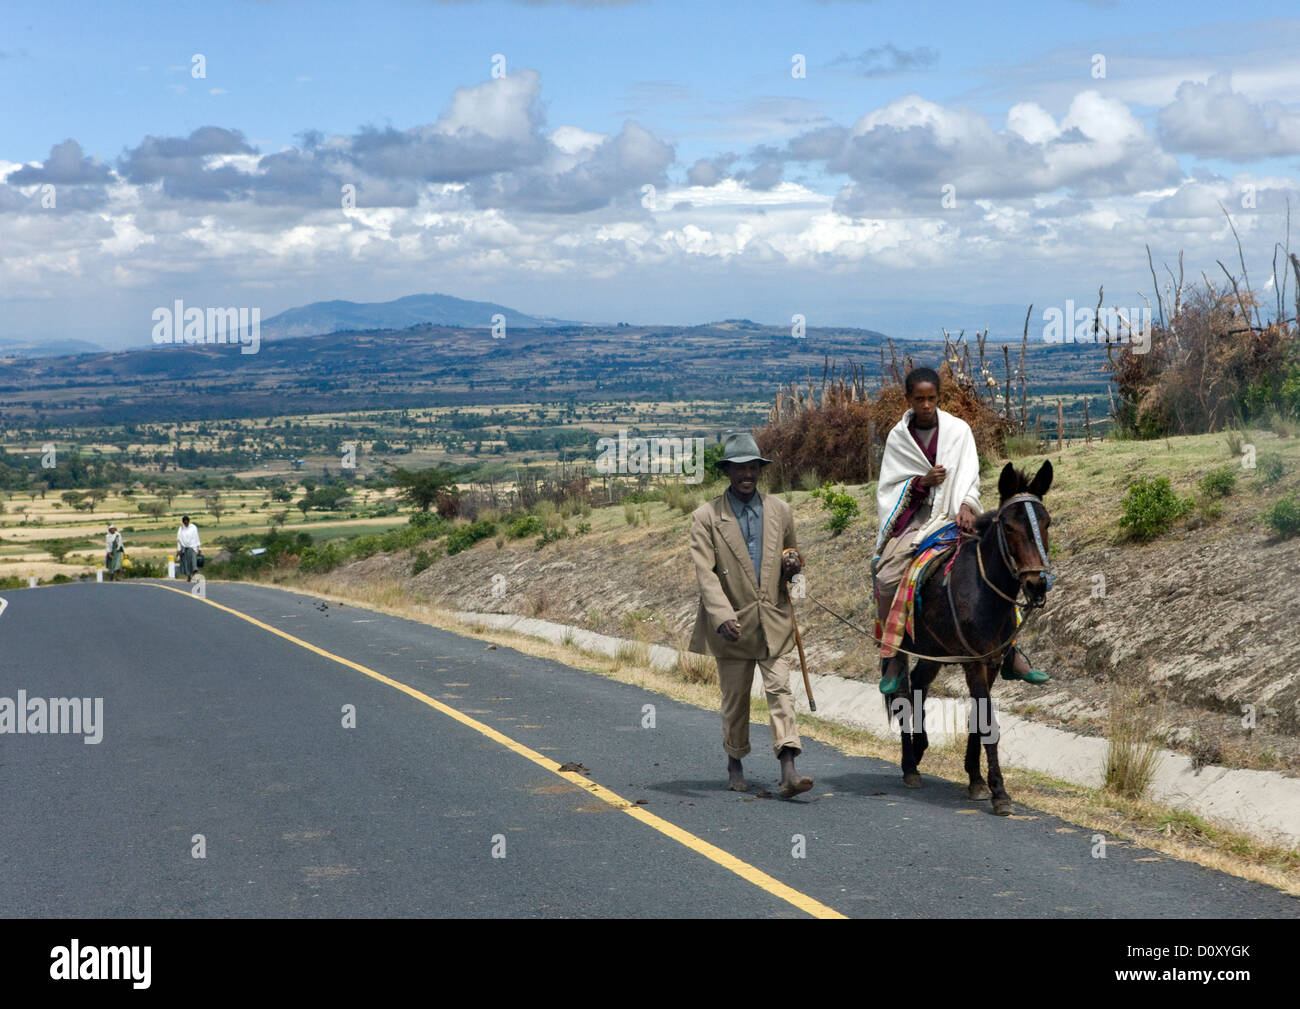 Man Riding A Horse On A Brand New Highway, Konso, Ethiopia Stock Photo